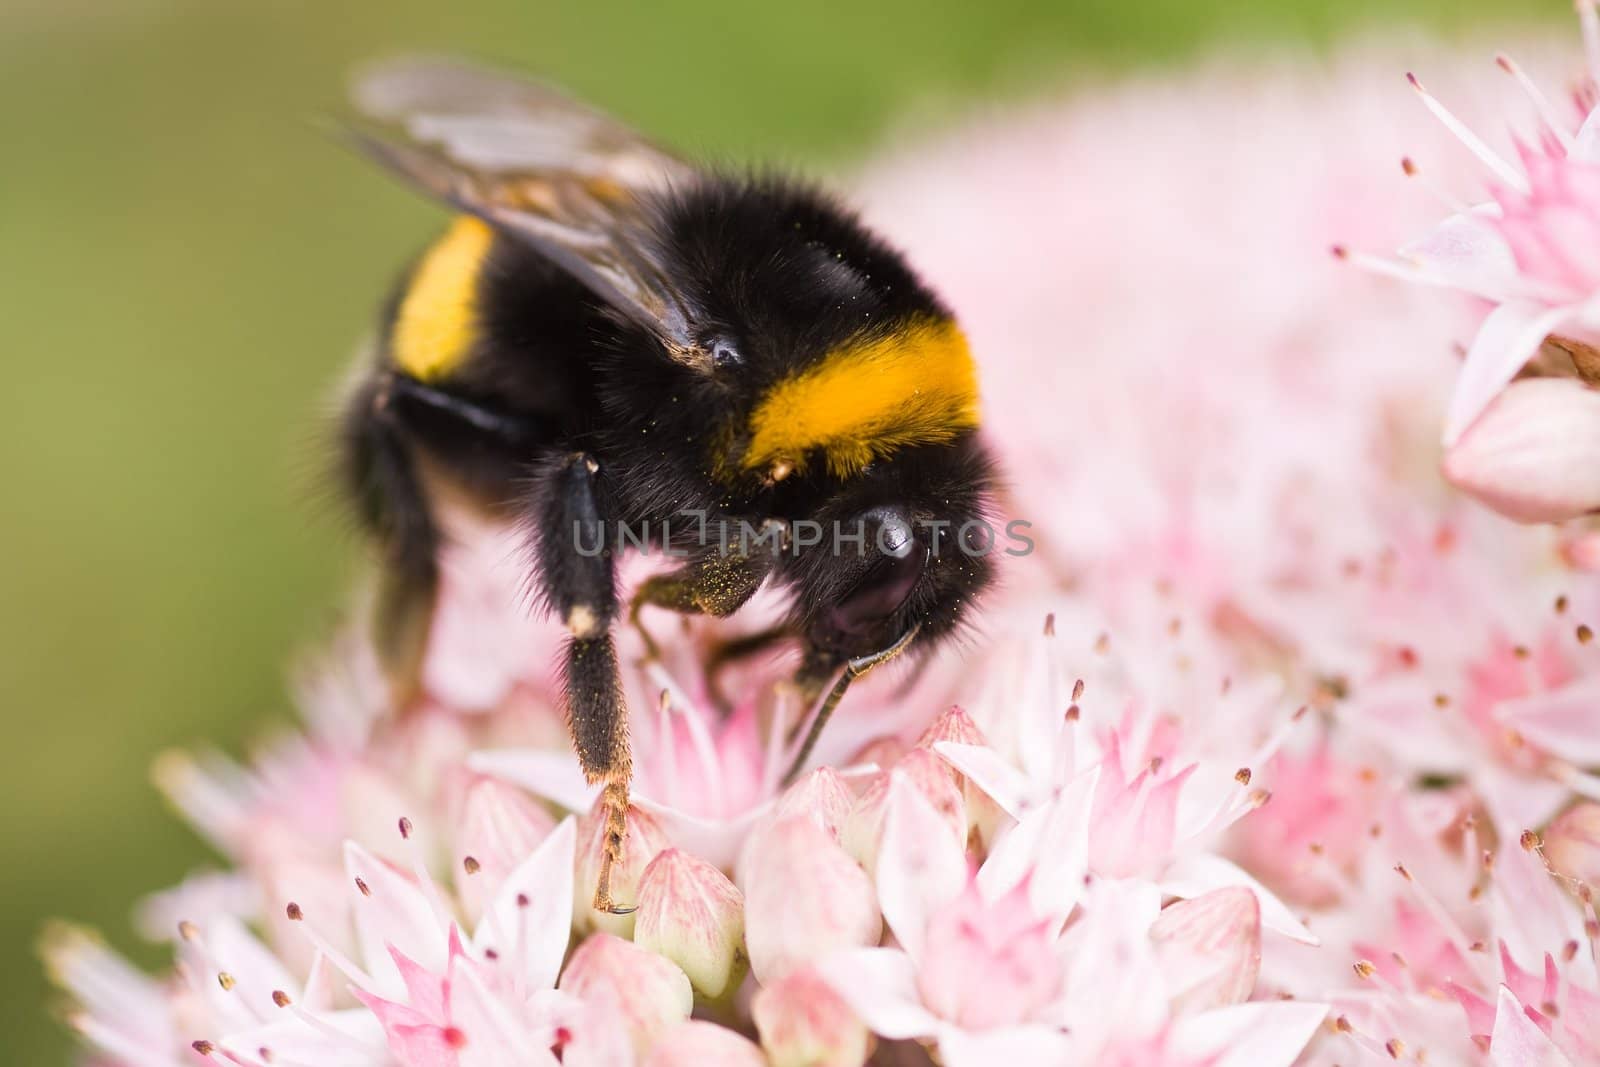 Bumble bee busy getting nectar from sedum 